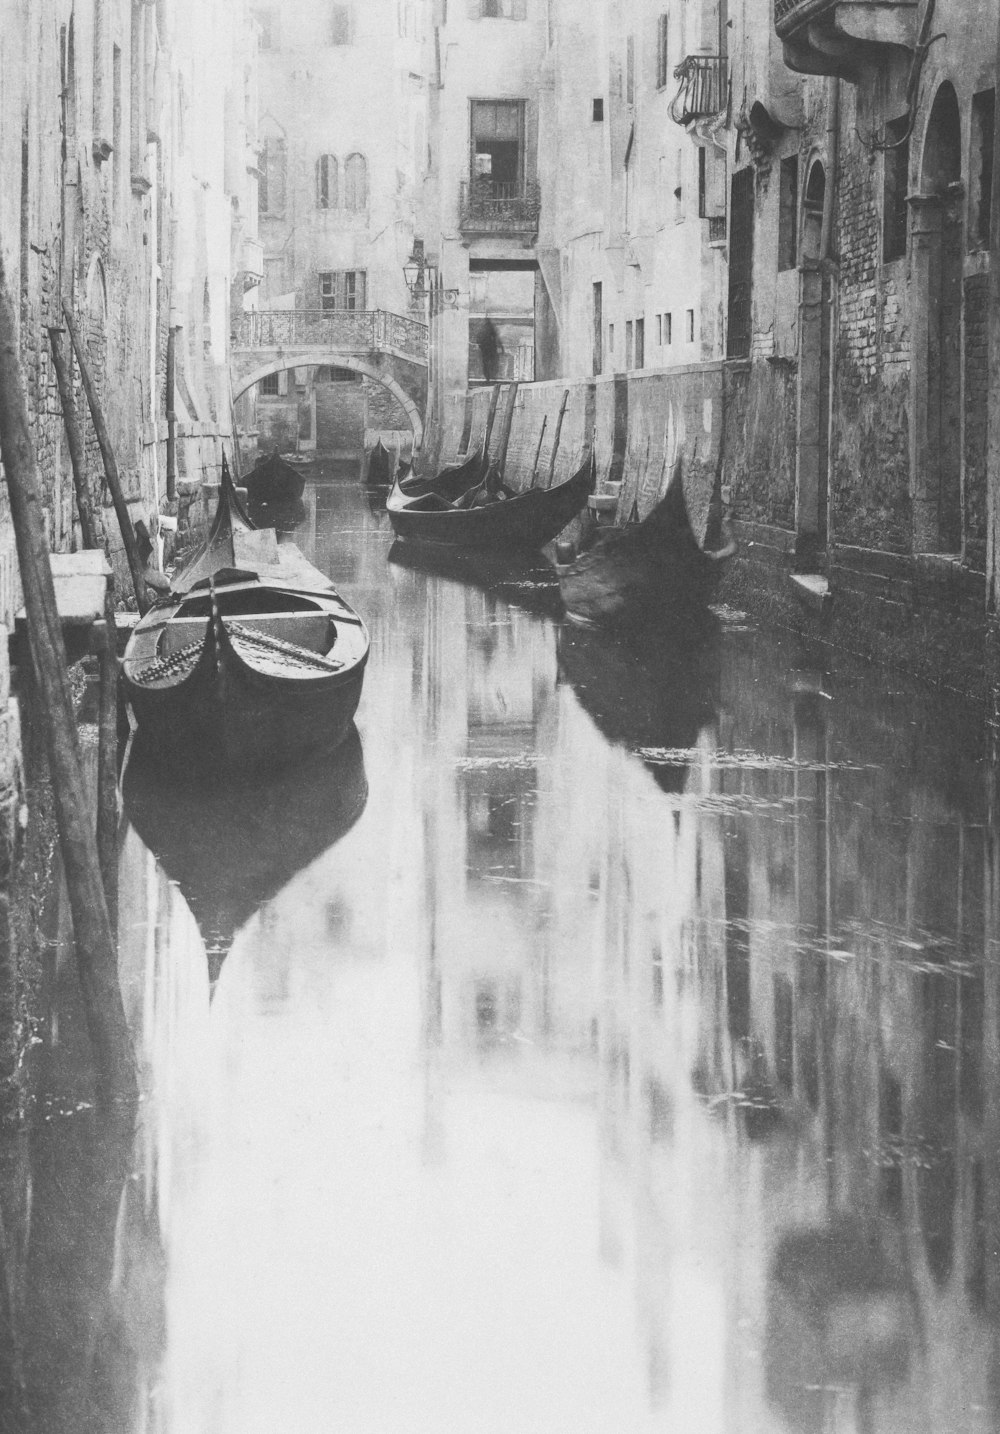 a black and white photo of a canal with boats